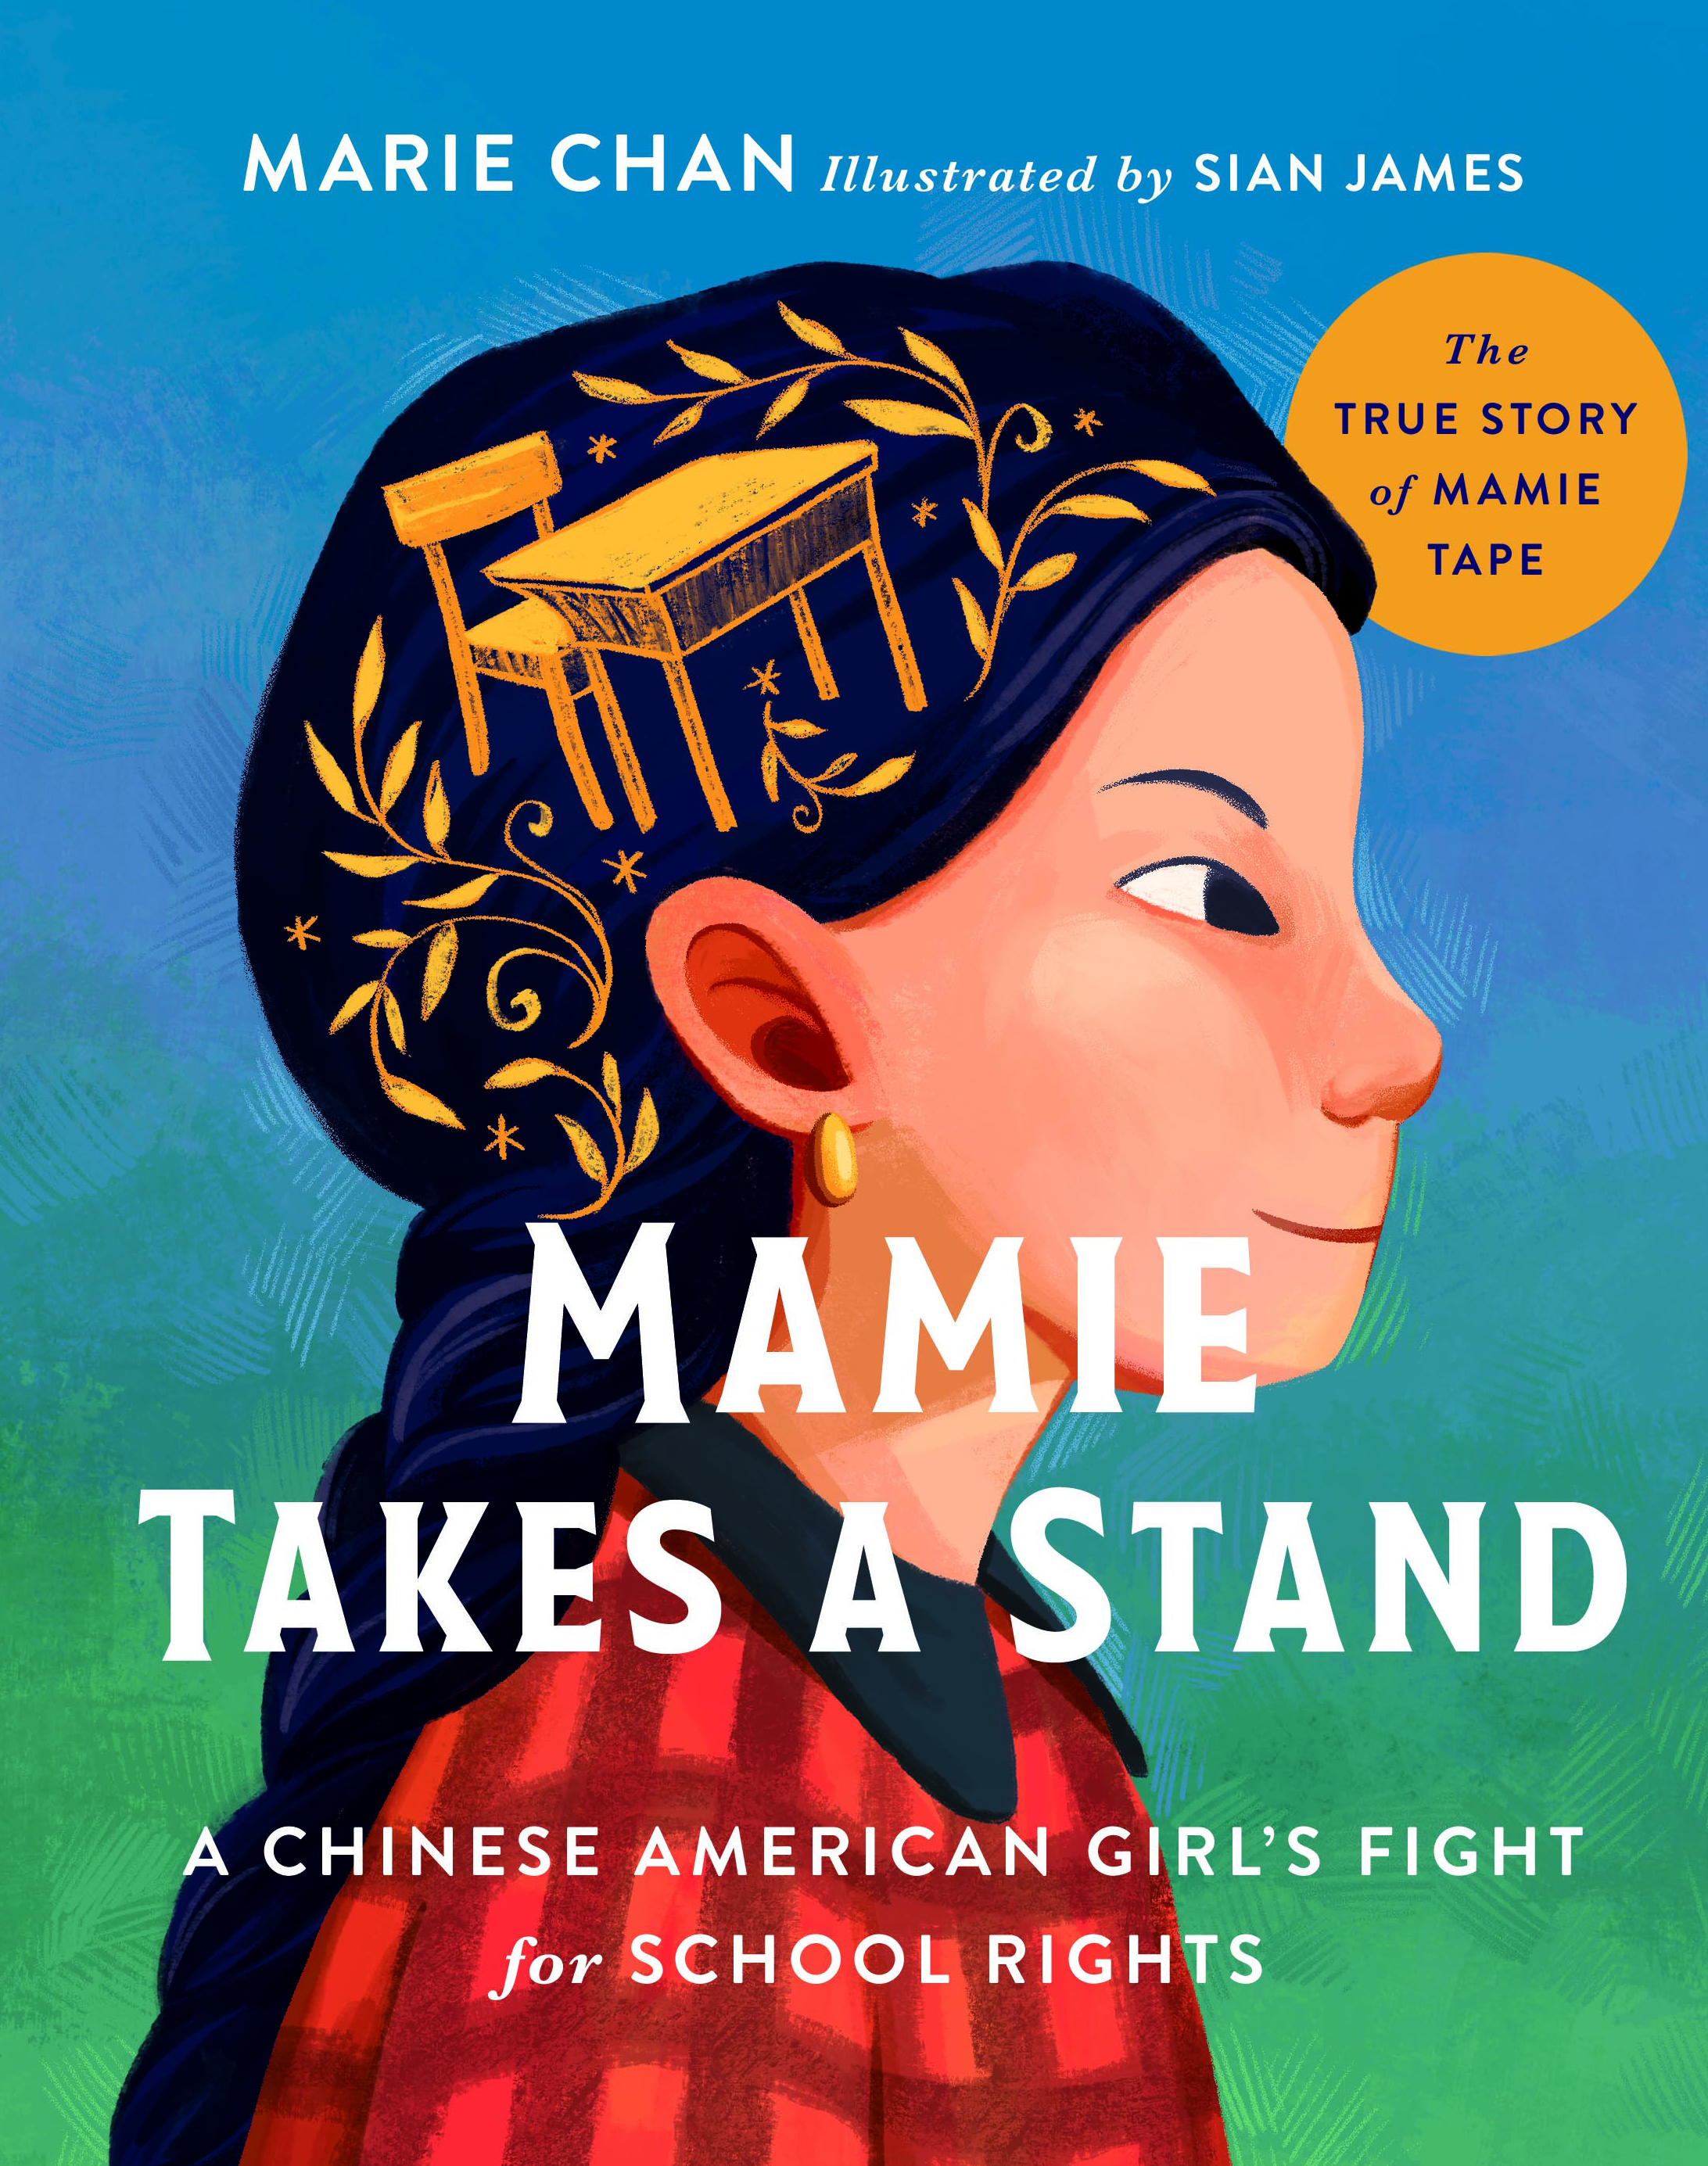 "Mamie Takes A Stand" book cover